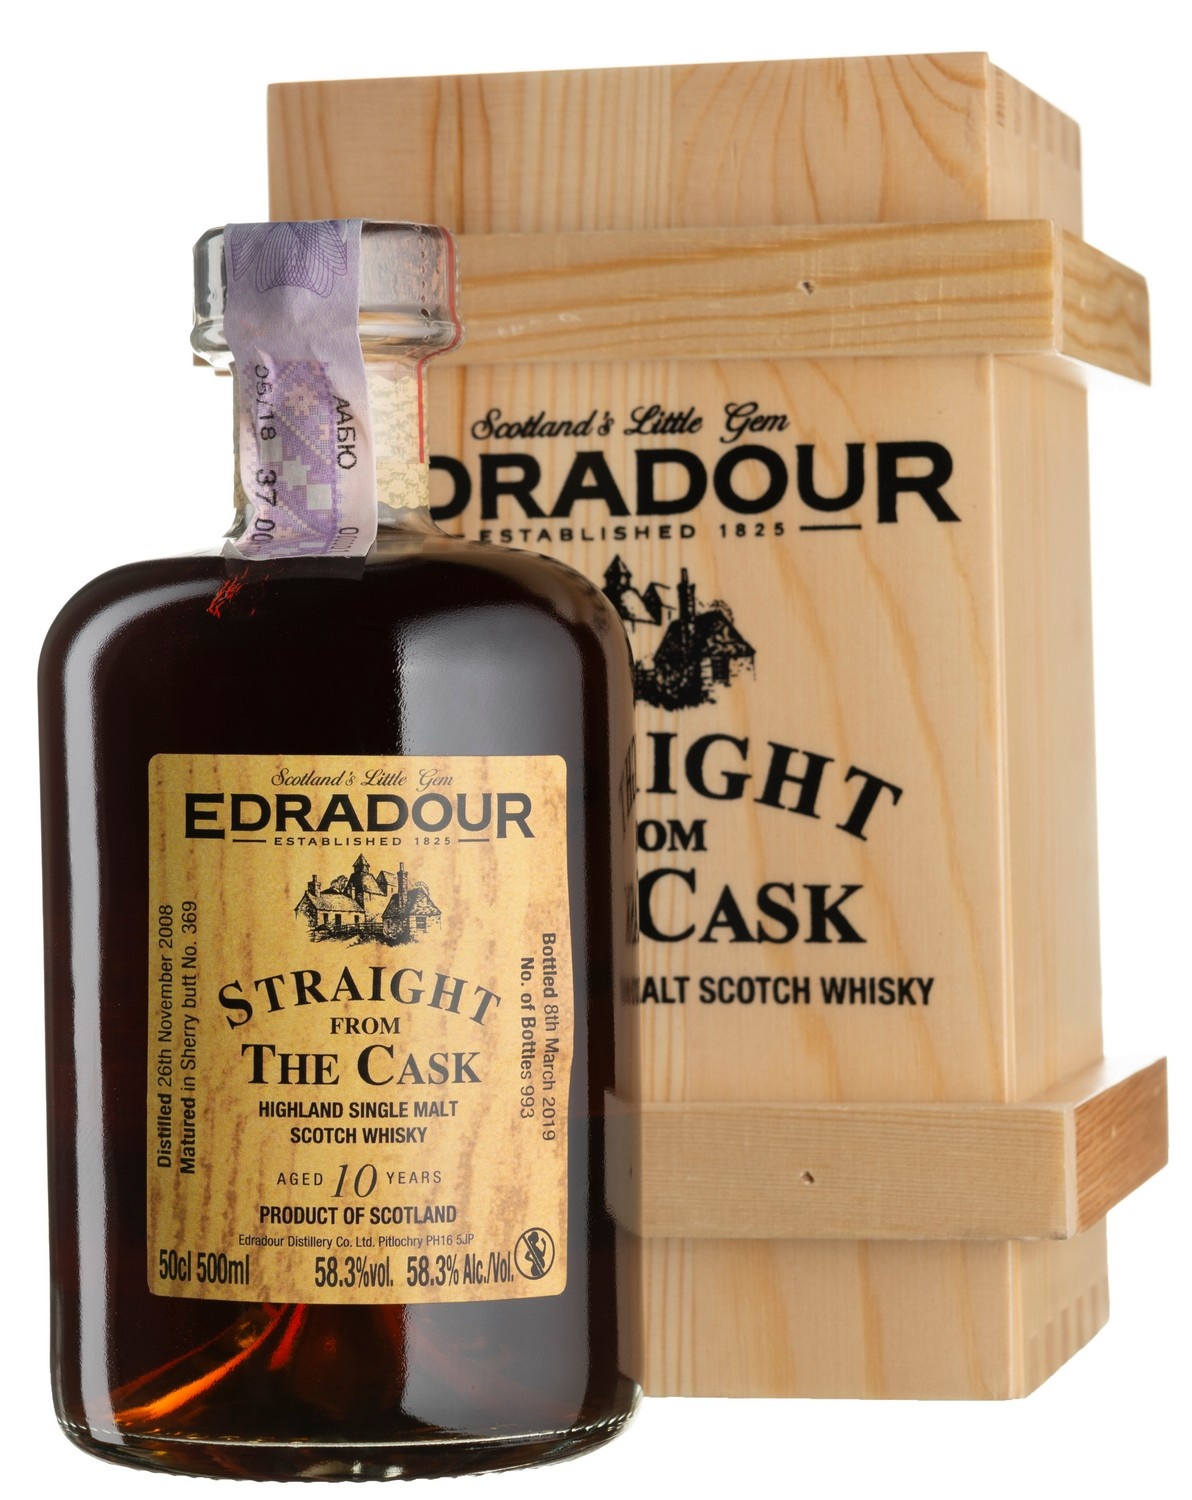 Edradour 10 YO 2008/2019 Straight From The Cask Sherry 500ml - 3